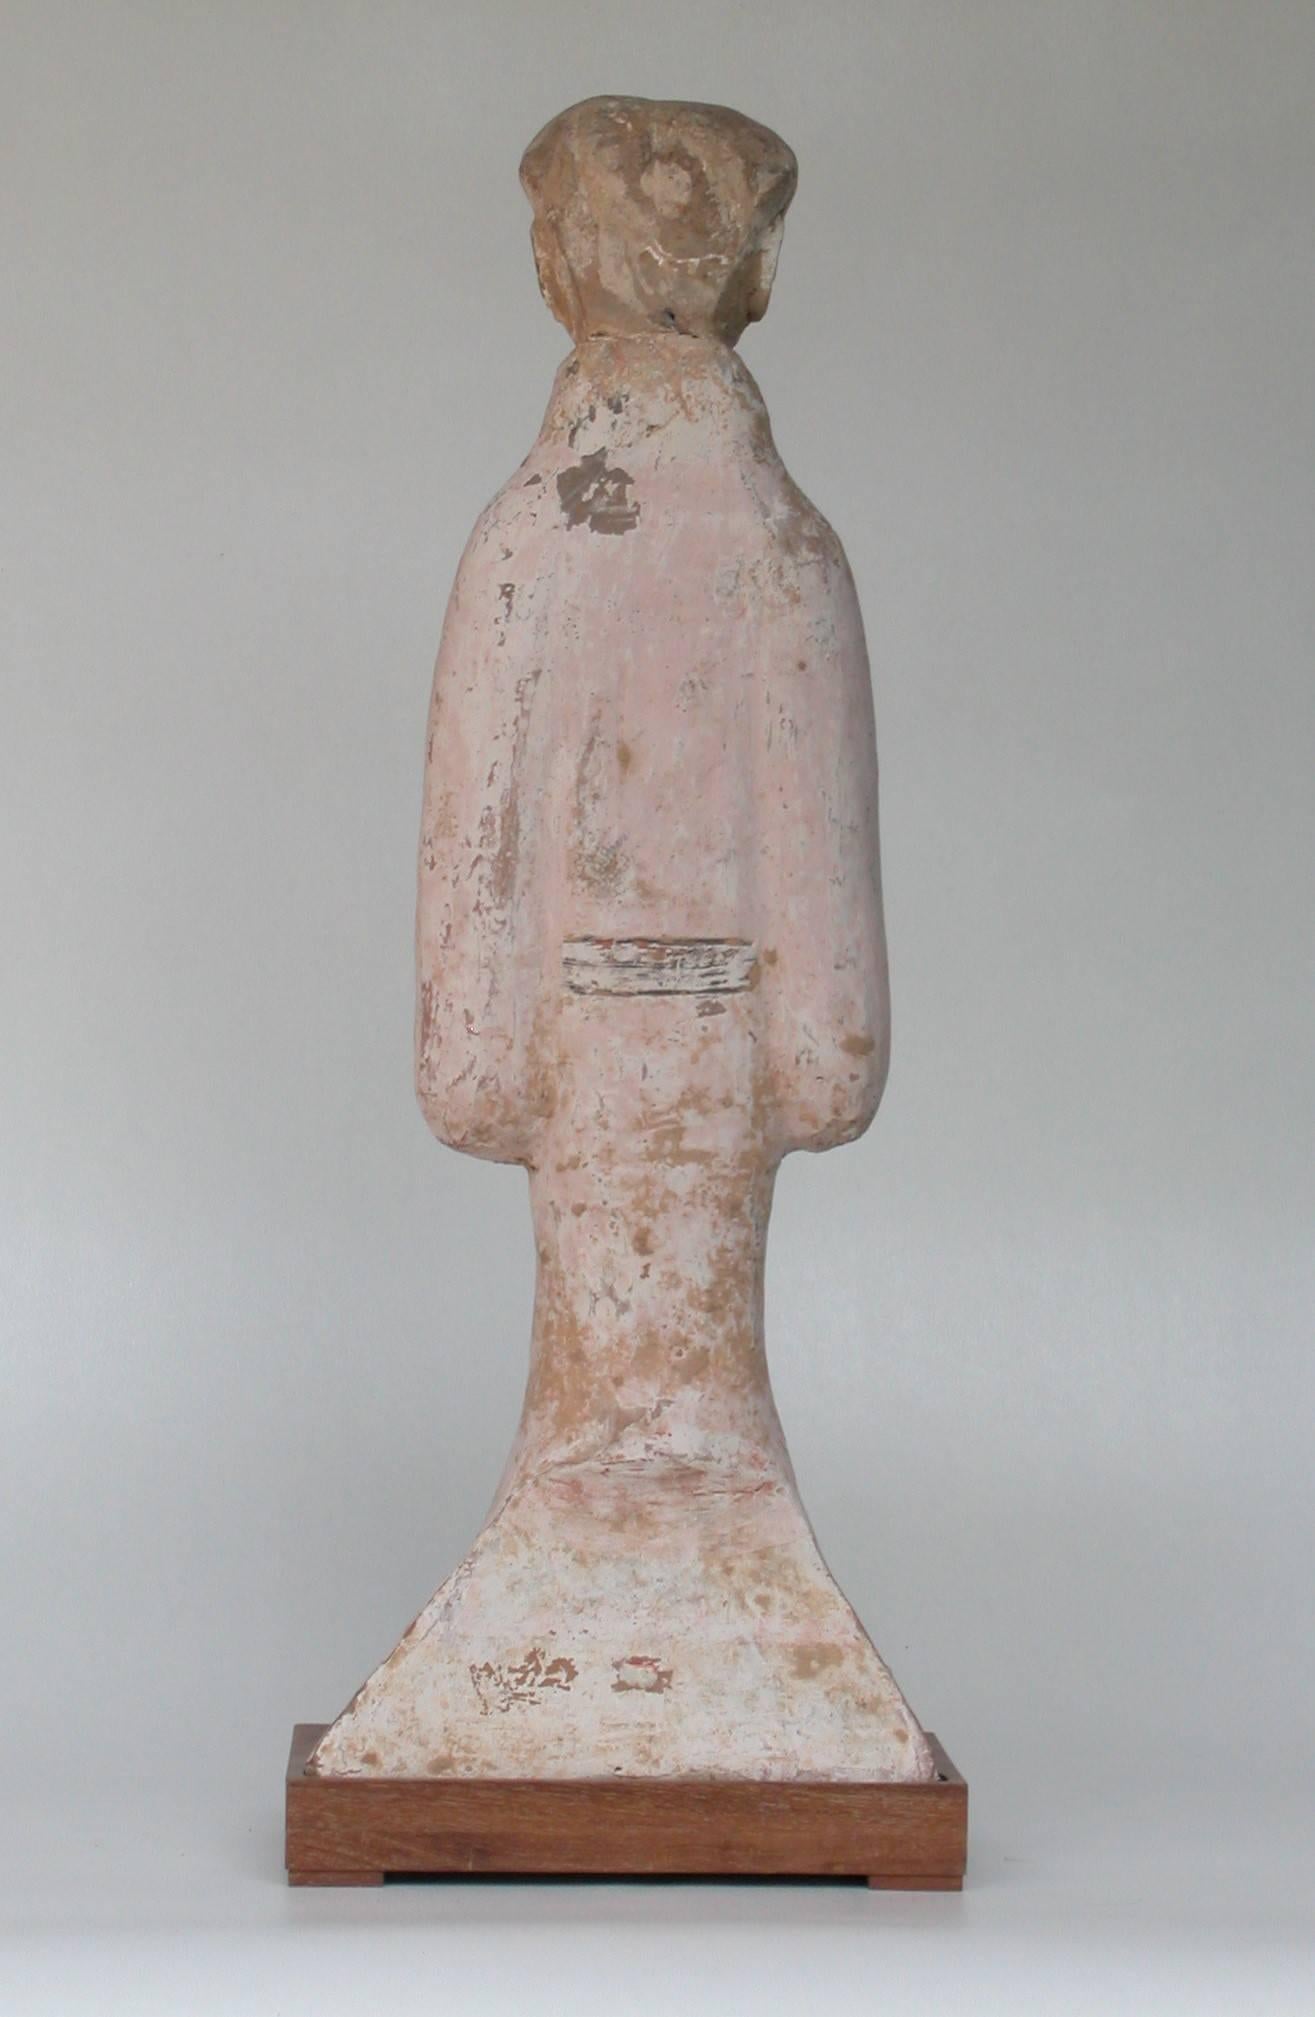 Ancient Chinese Han dynasty tomb, figure of a lady, 200 B.C.
Formerly in the collection of commander F. H. G. Allen.
Exposed in 1953 on the exhibition of PRE-T´HANG Wares, held by the oriental ceramic society.
With original exhibition label and